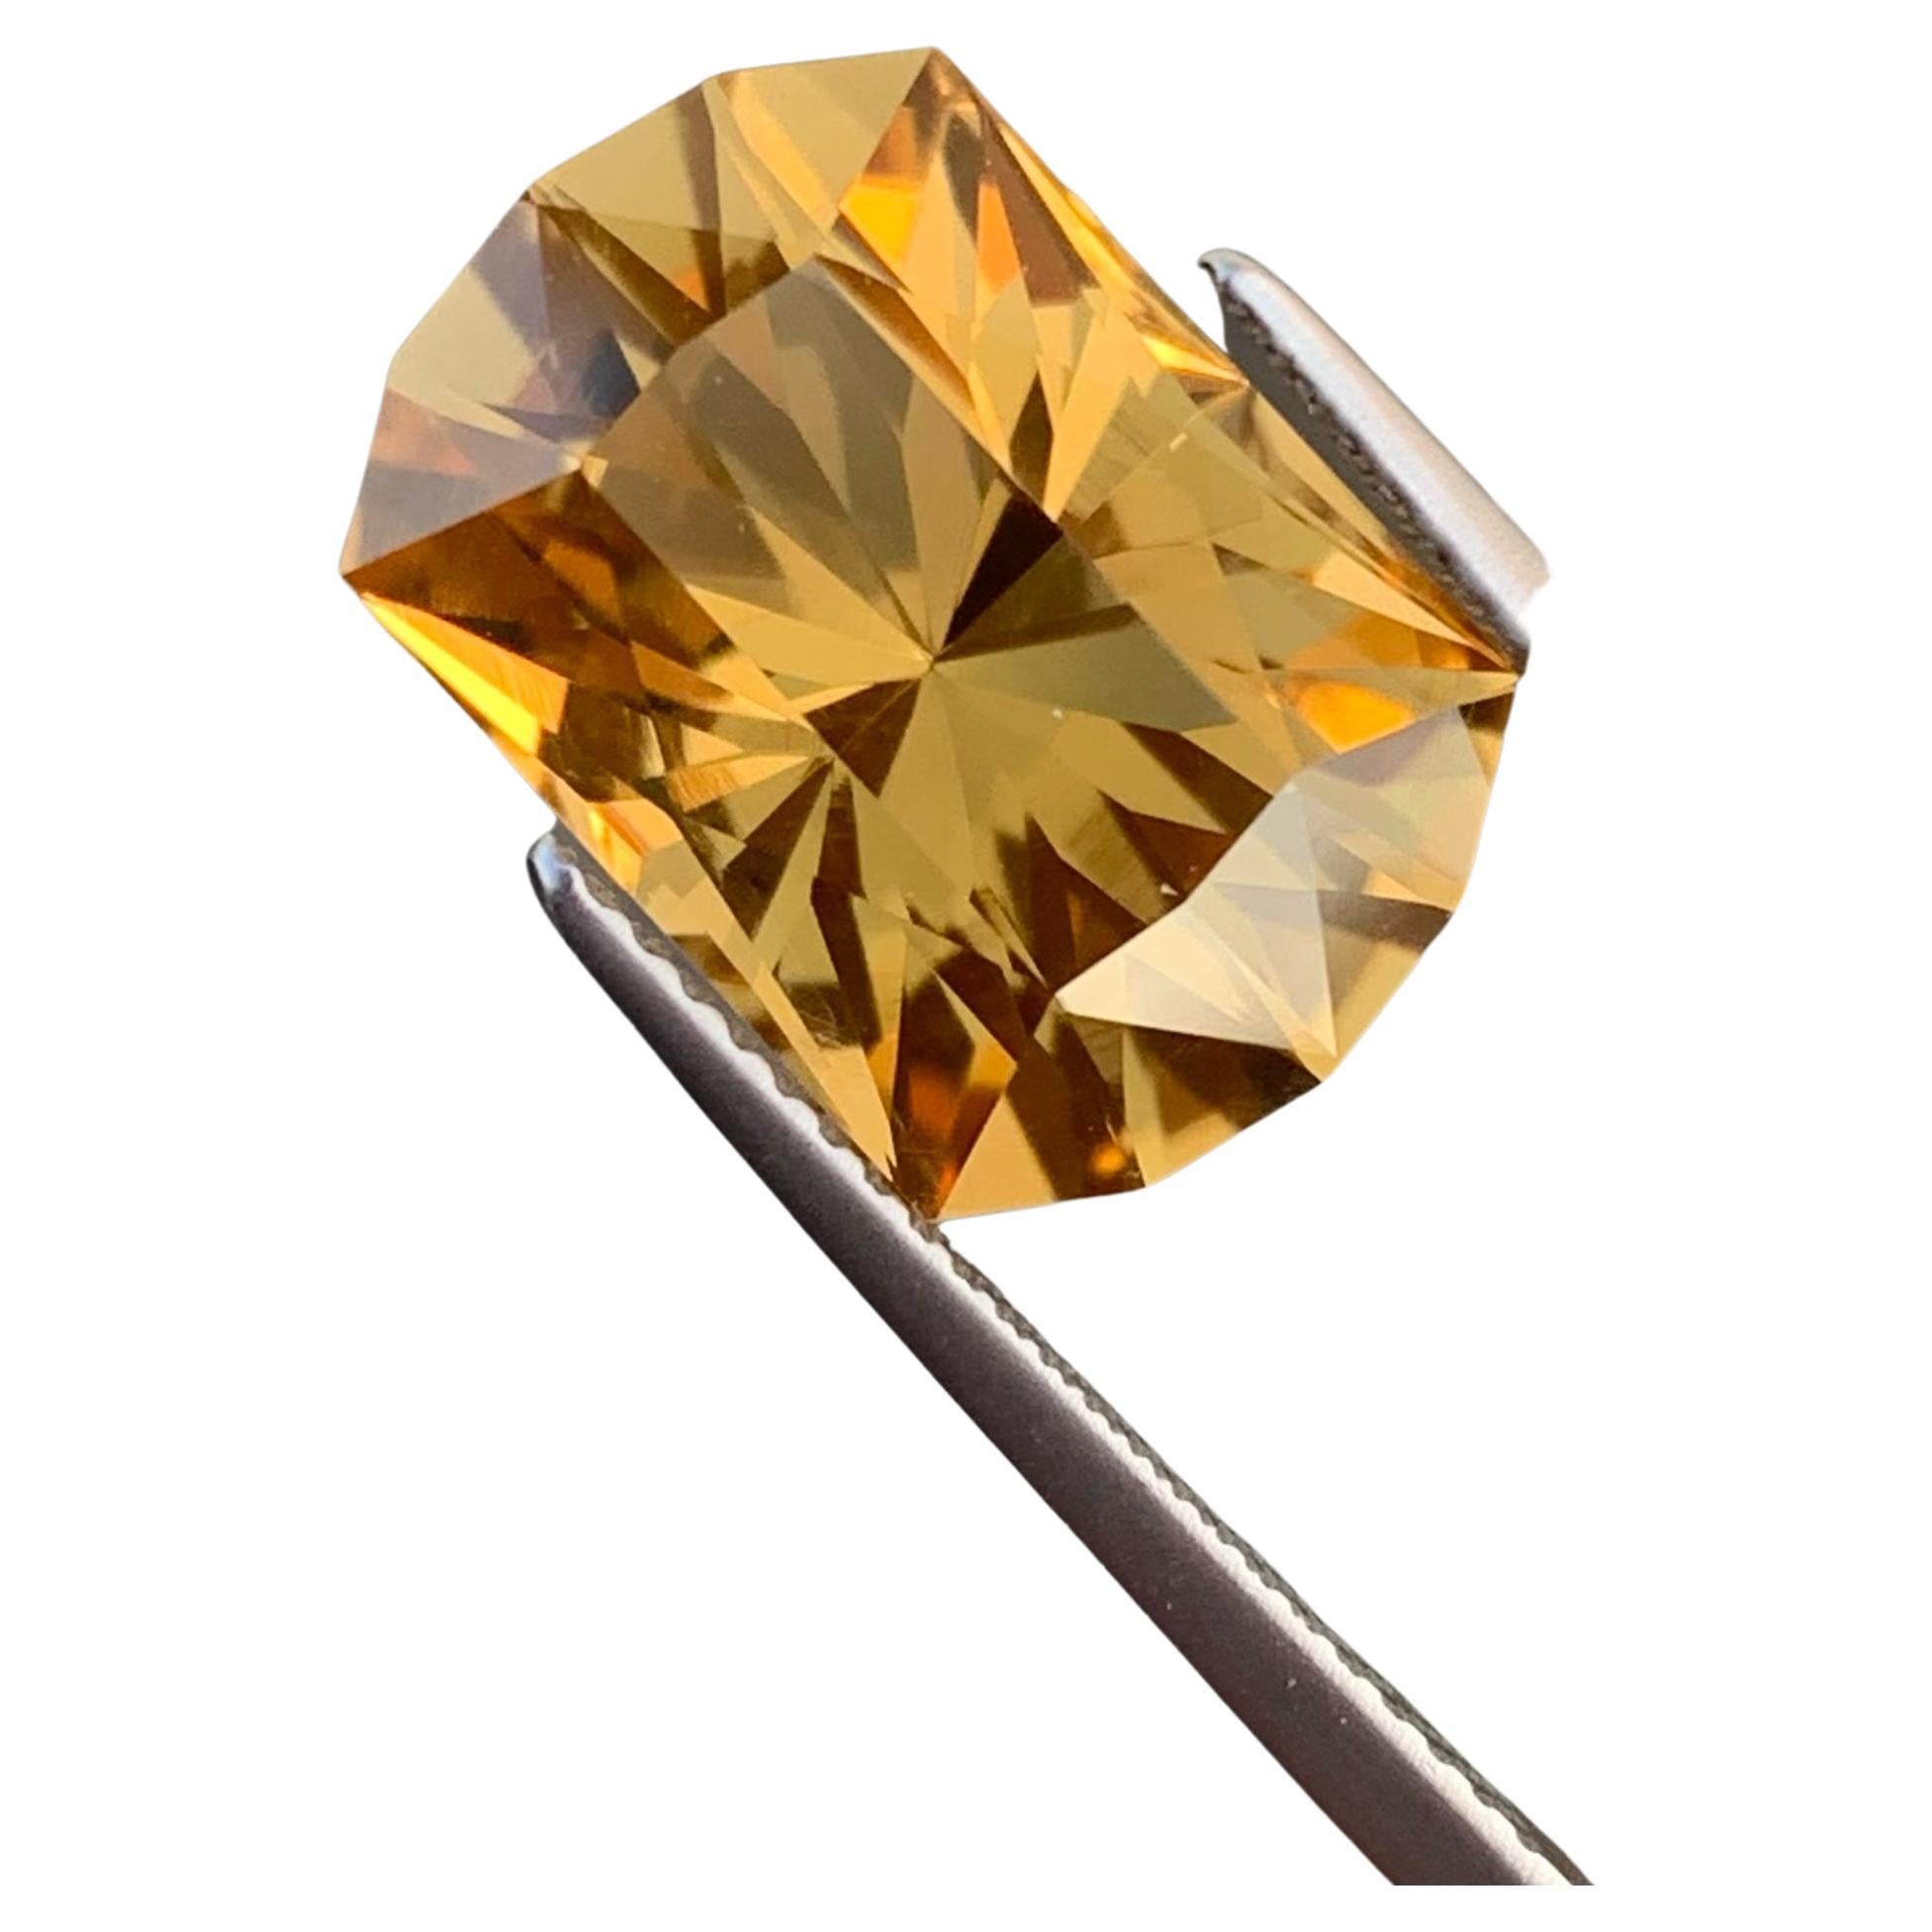 Lovely Natural Citrine Loose Gemstone, Available For Sale At Wholesale Price Natural High Quality 8.30 Carats Loupe  Clean Clarity Natural Citrine From Brazil.

Product Information:
LOOSE GEMSTONE: Lovely Natural Citrine Loose Gemstone
WEIGHT: 8.30